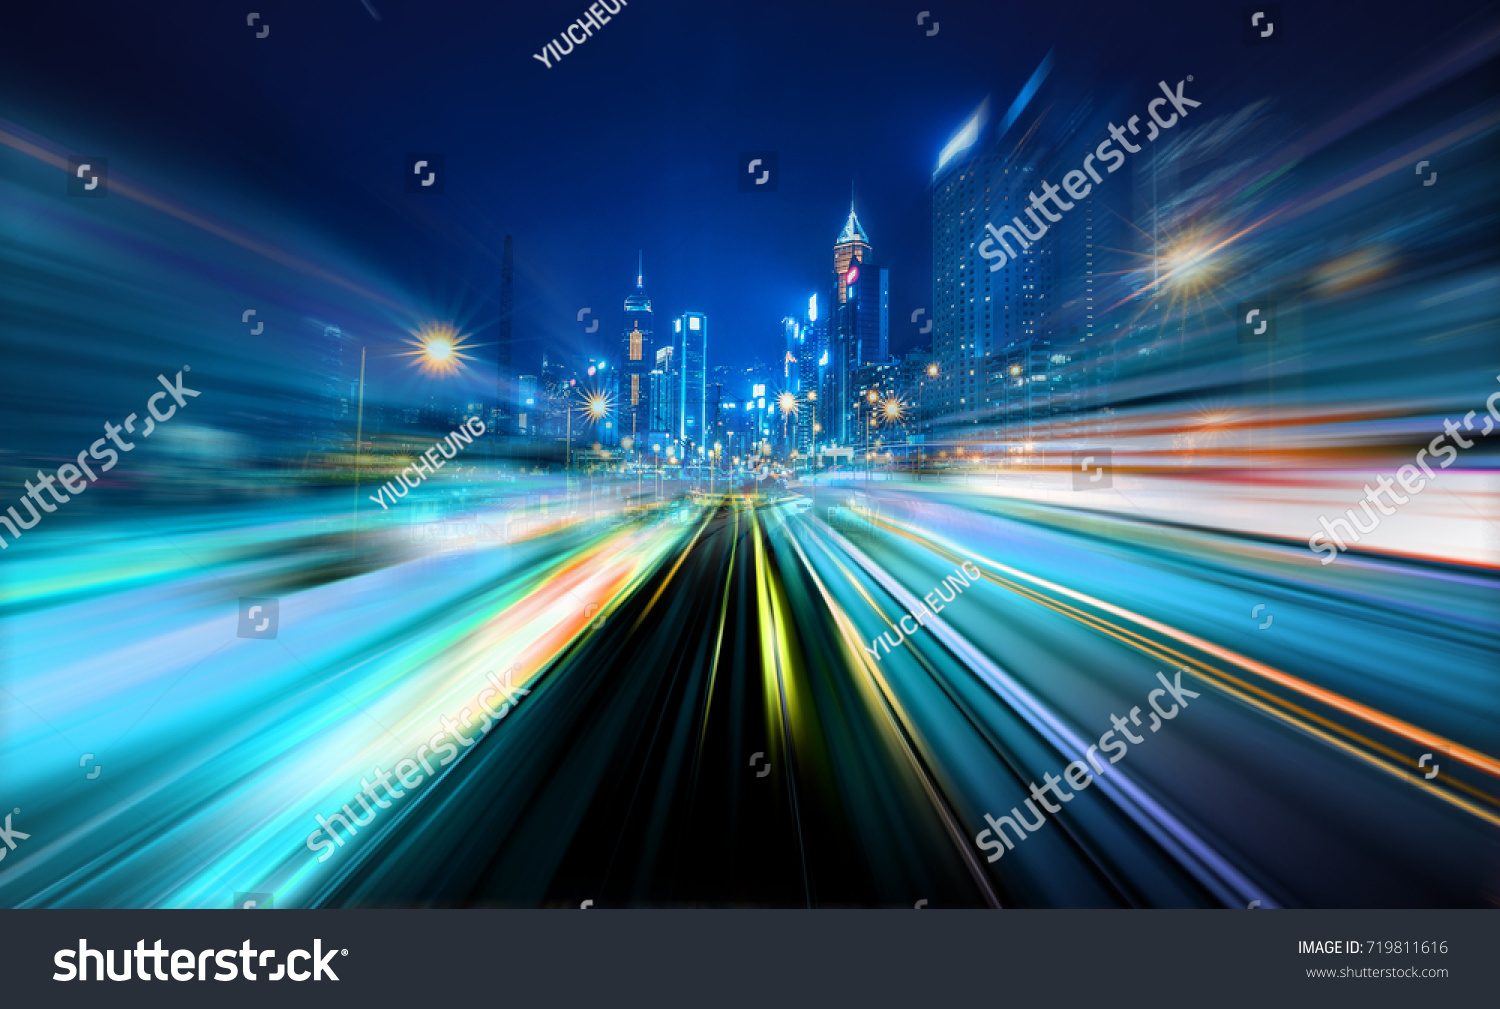 Abstract Motion Blur City #719811616